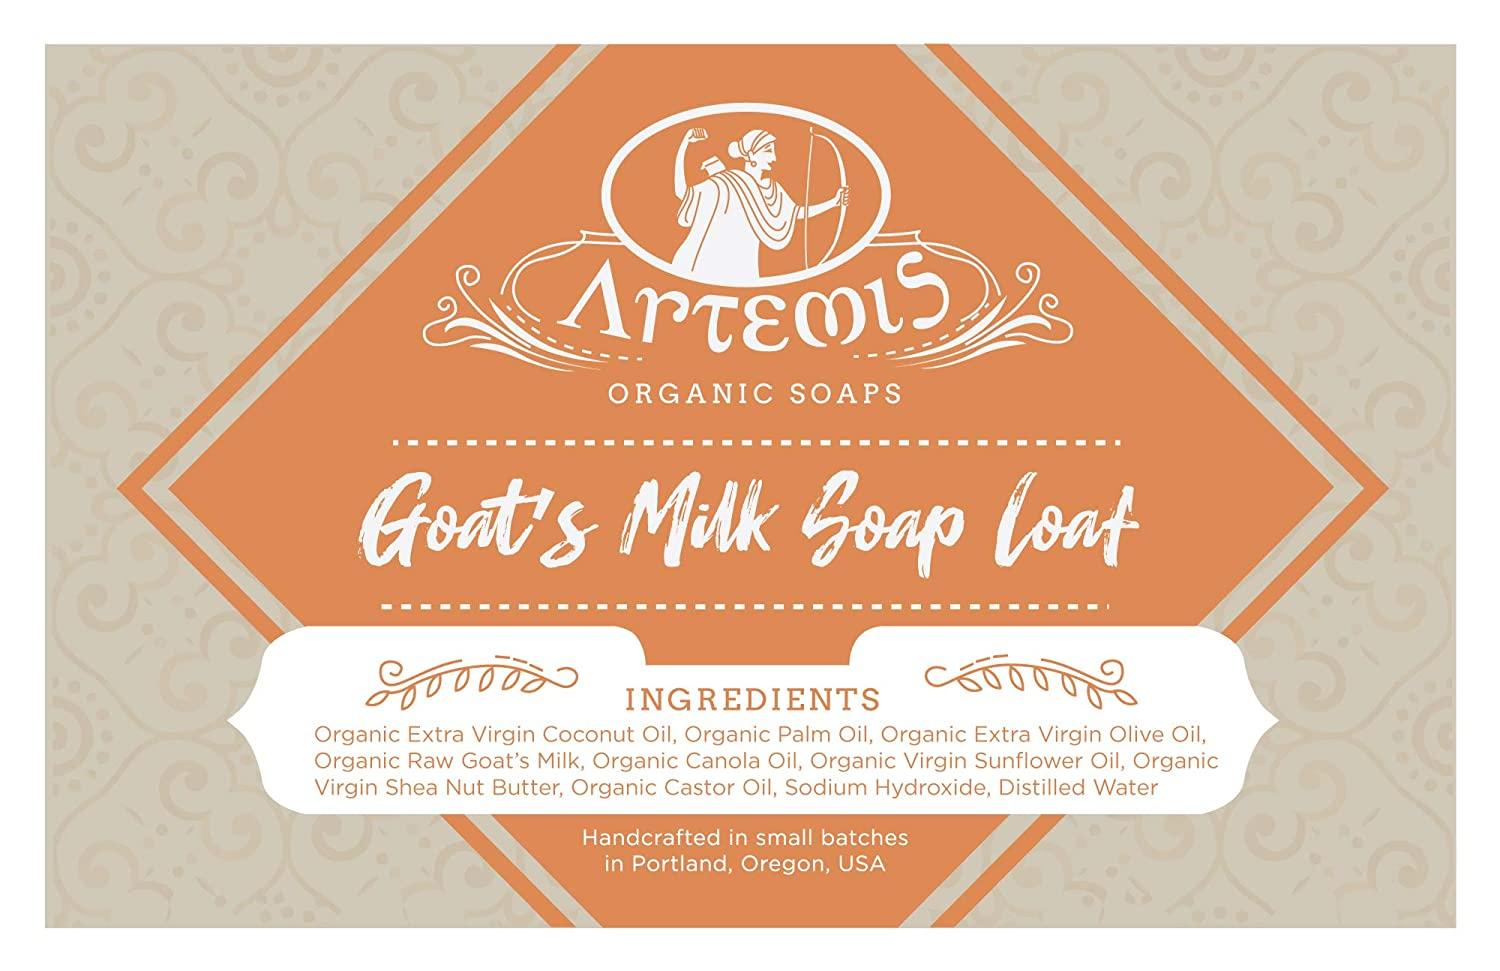 Organic Goat's Milk Soap Loaf - Cut Into 8 to 10 Soap Bars